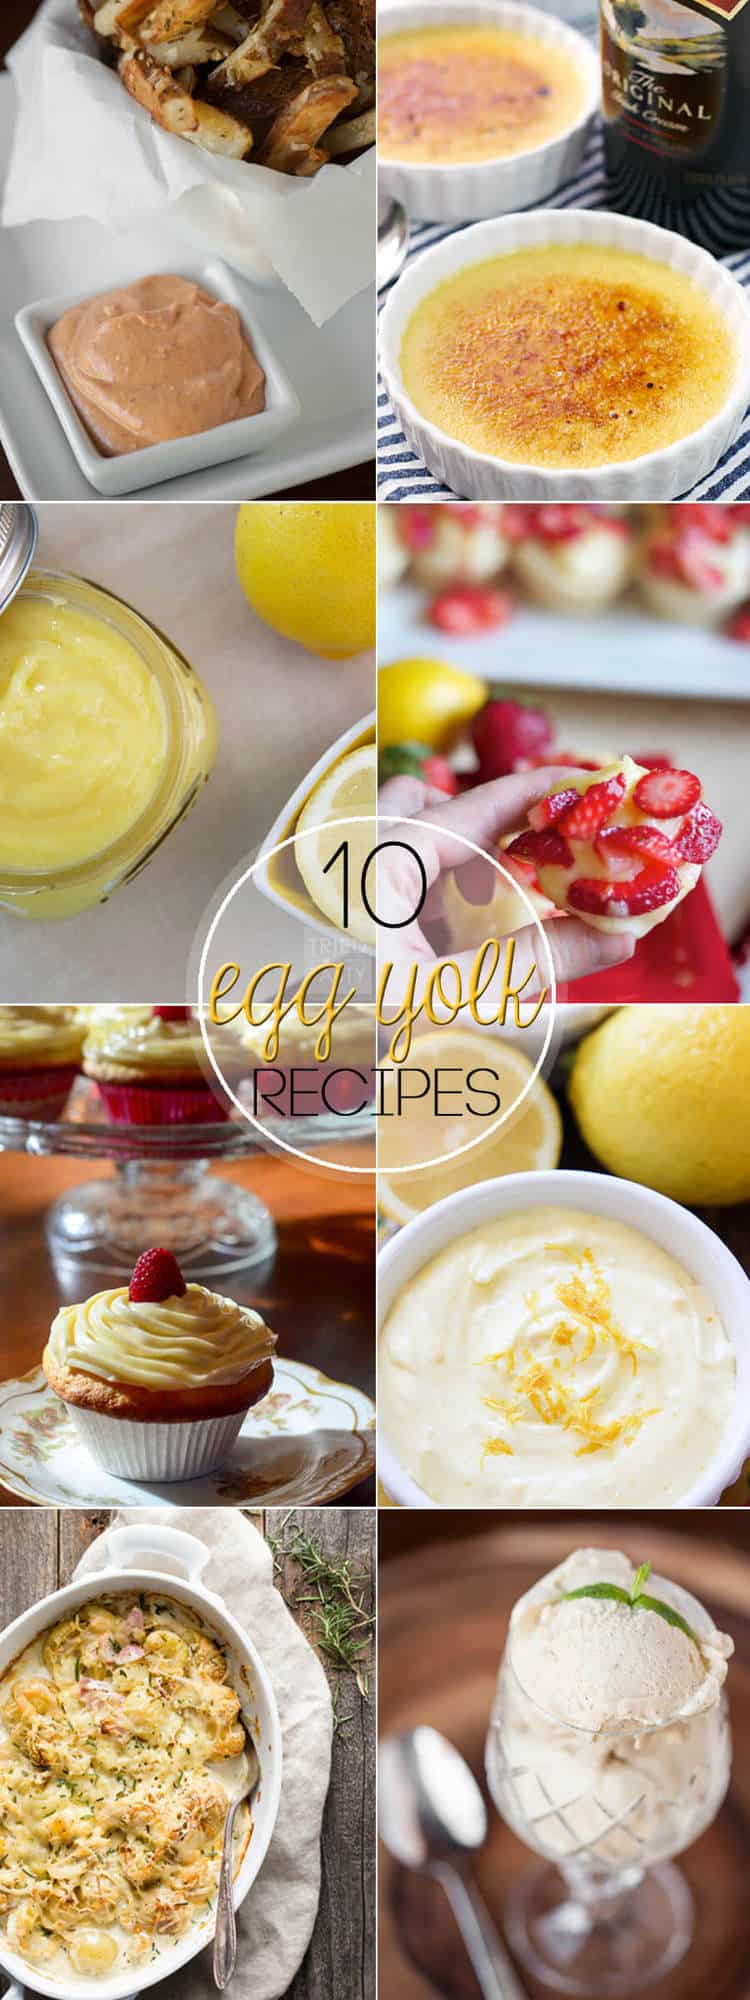 An 8 image vertical collage of 10 Egg Yolk Recipes with text overlay.